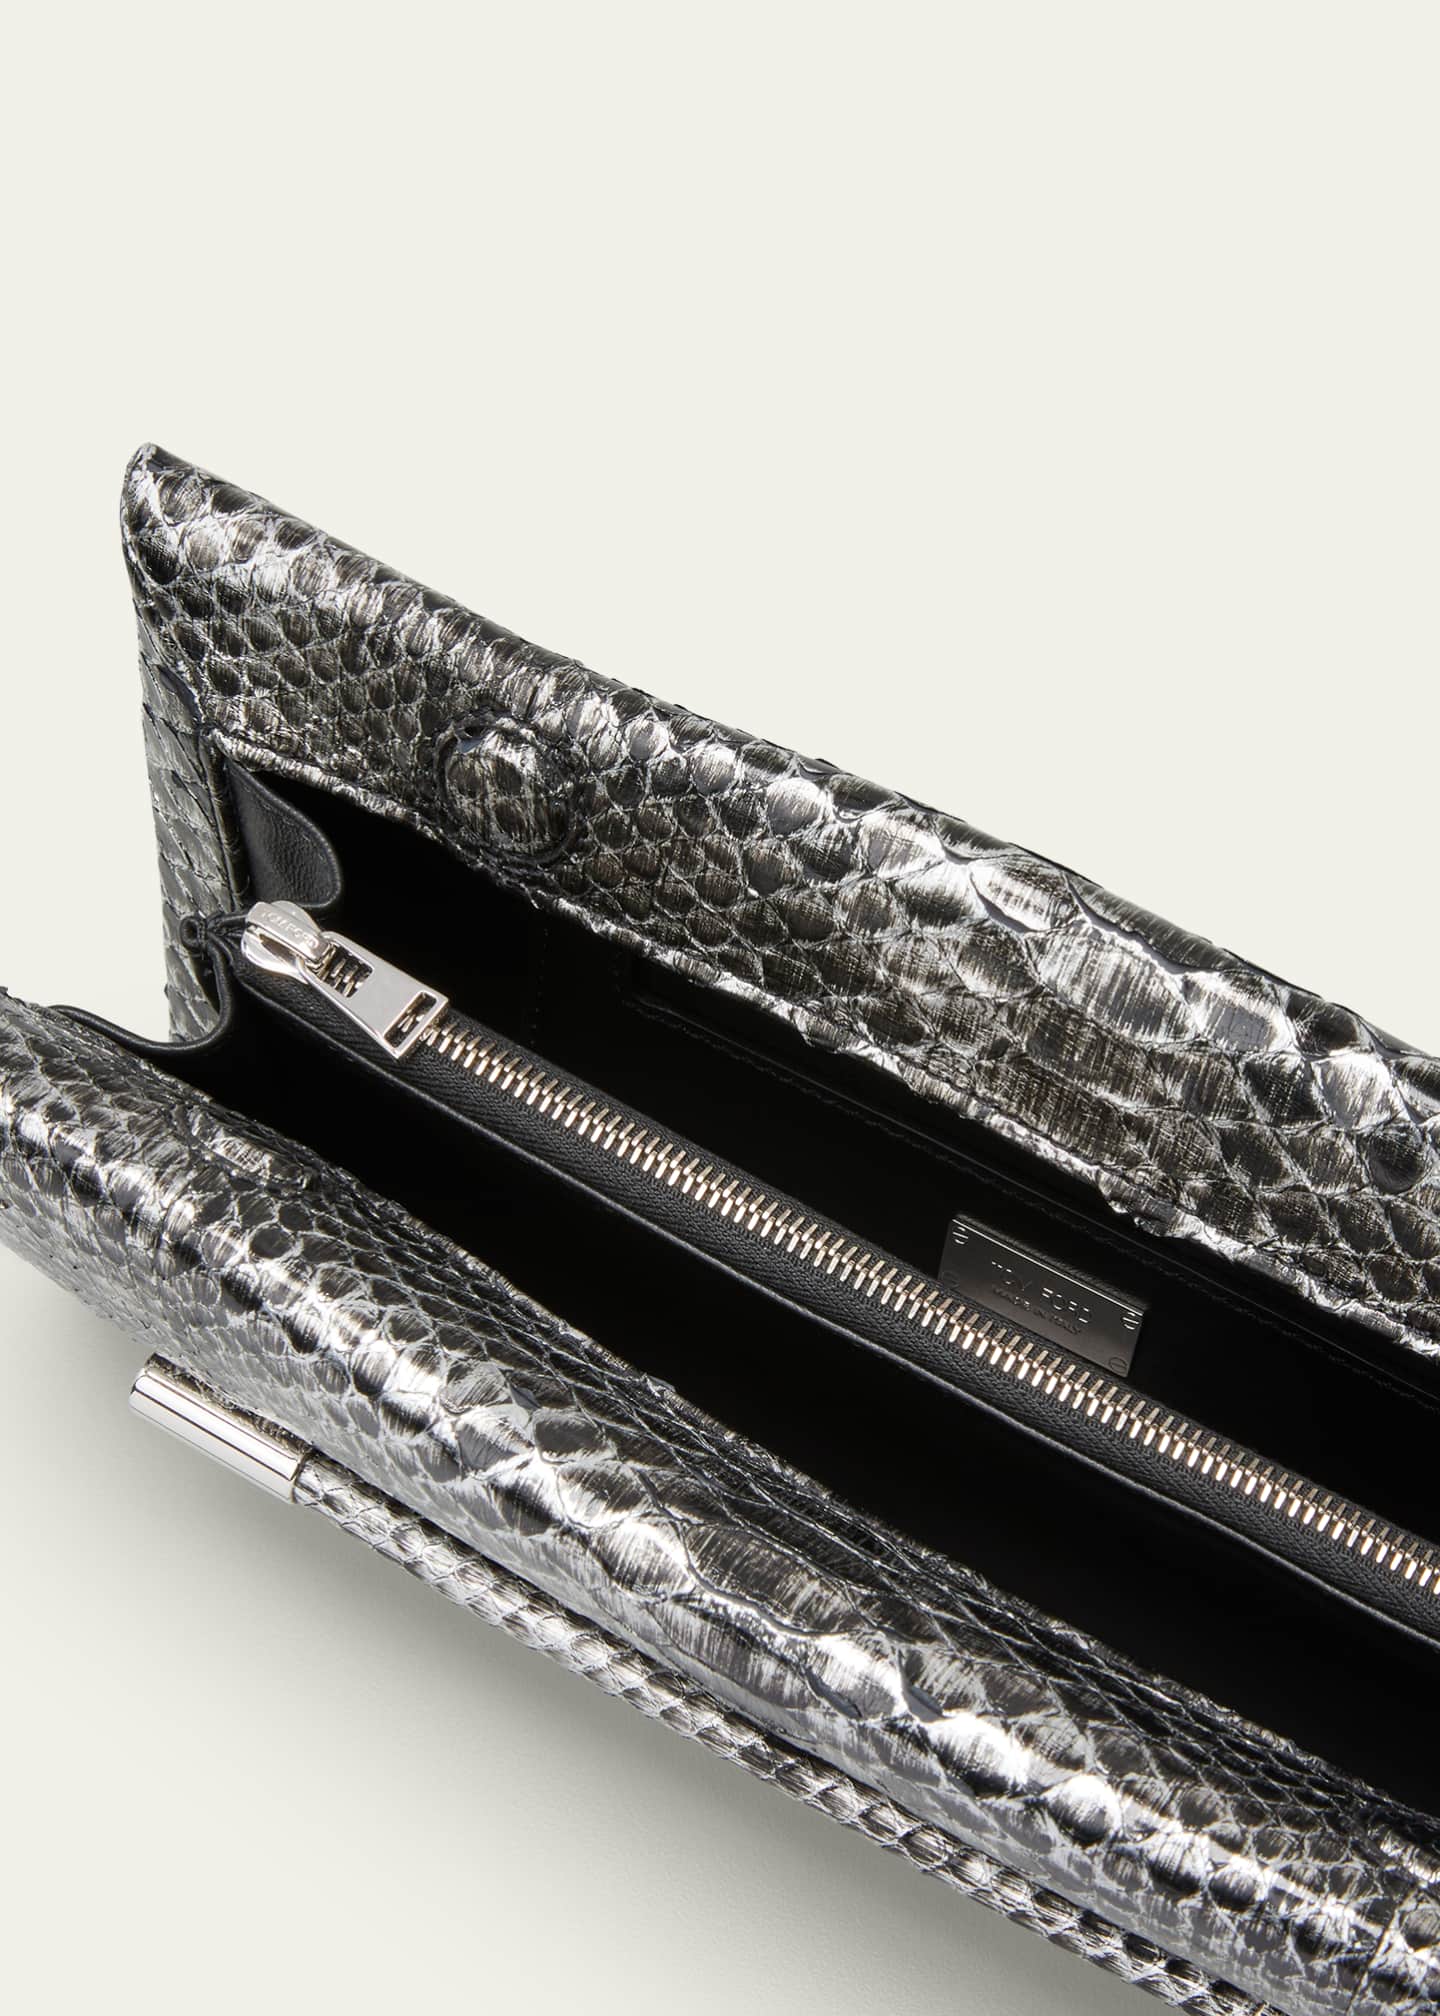 Tom Ford Ava Python Clutch Bag, Silver, Women's, Clutches & Small Handbags Clutches Pouches & Wristlets